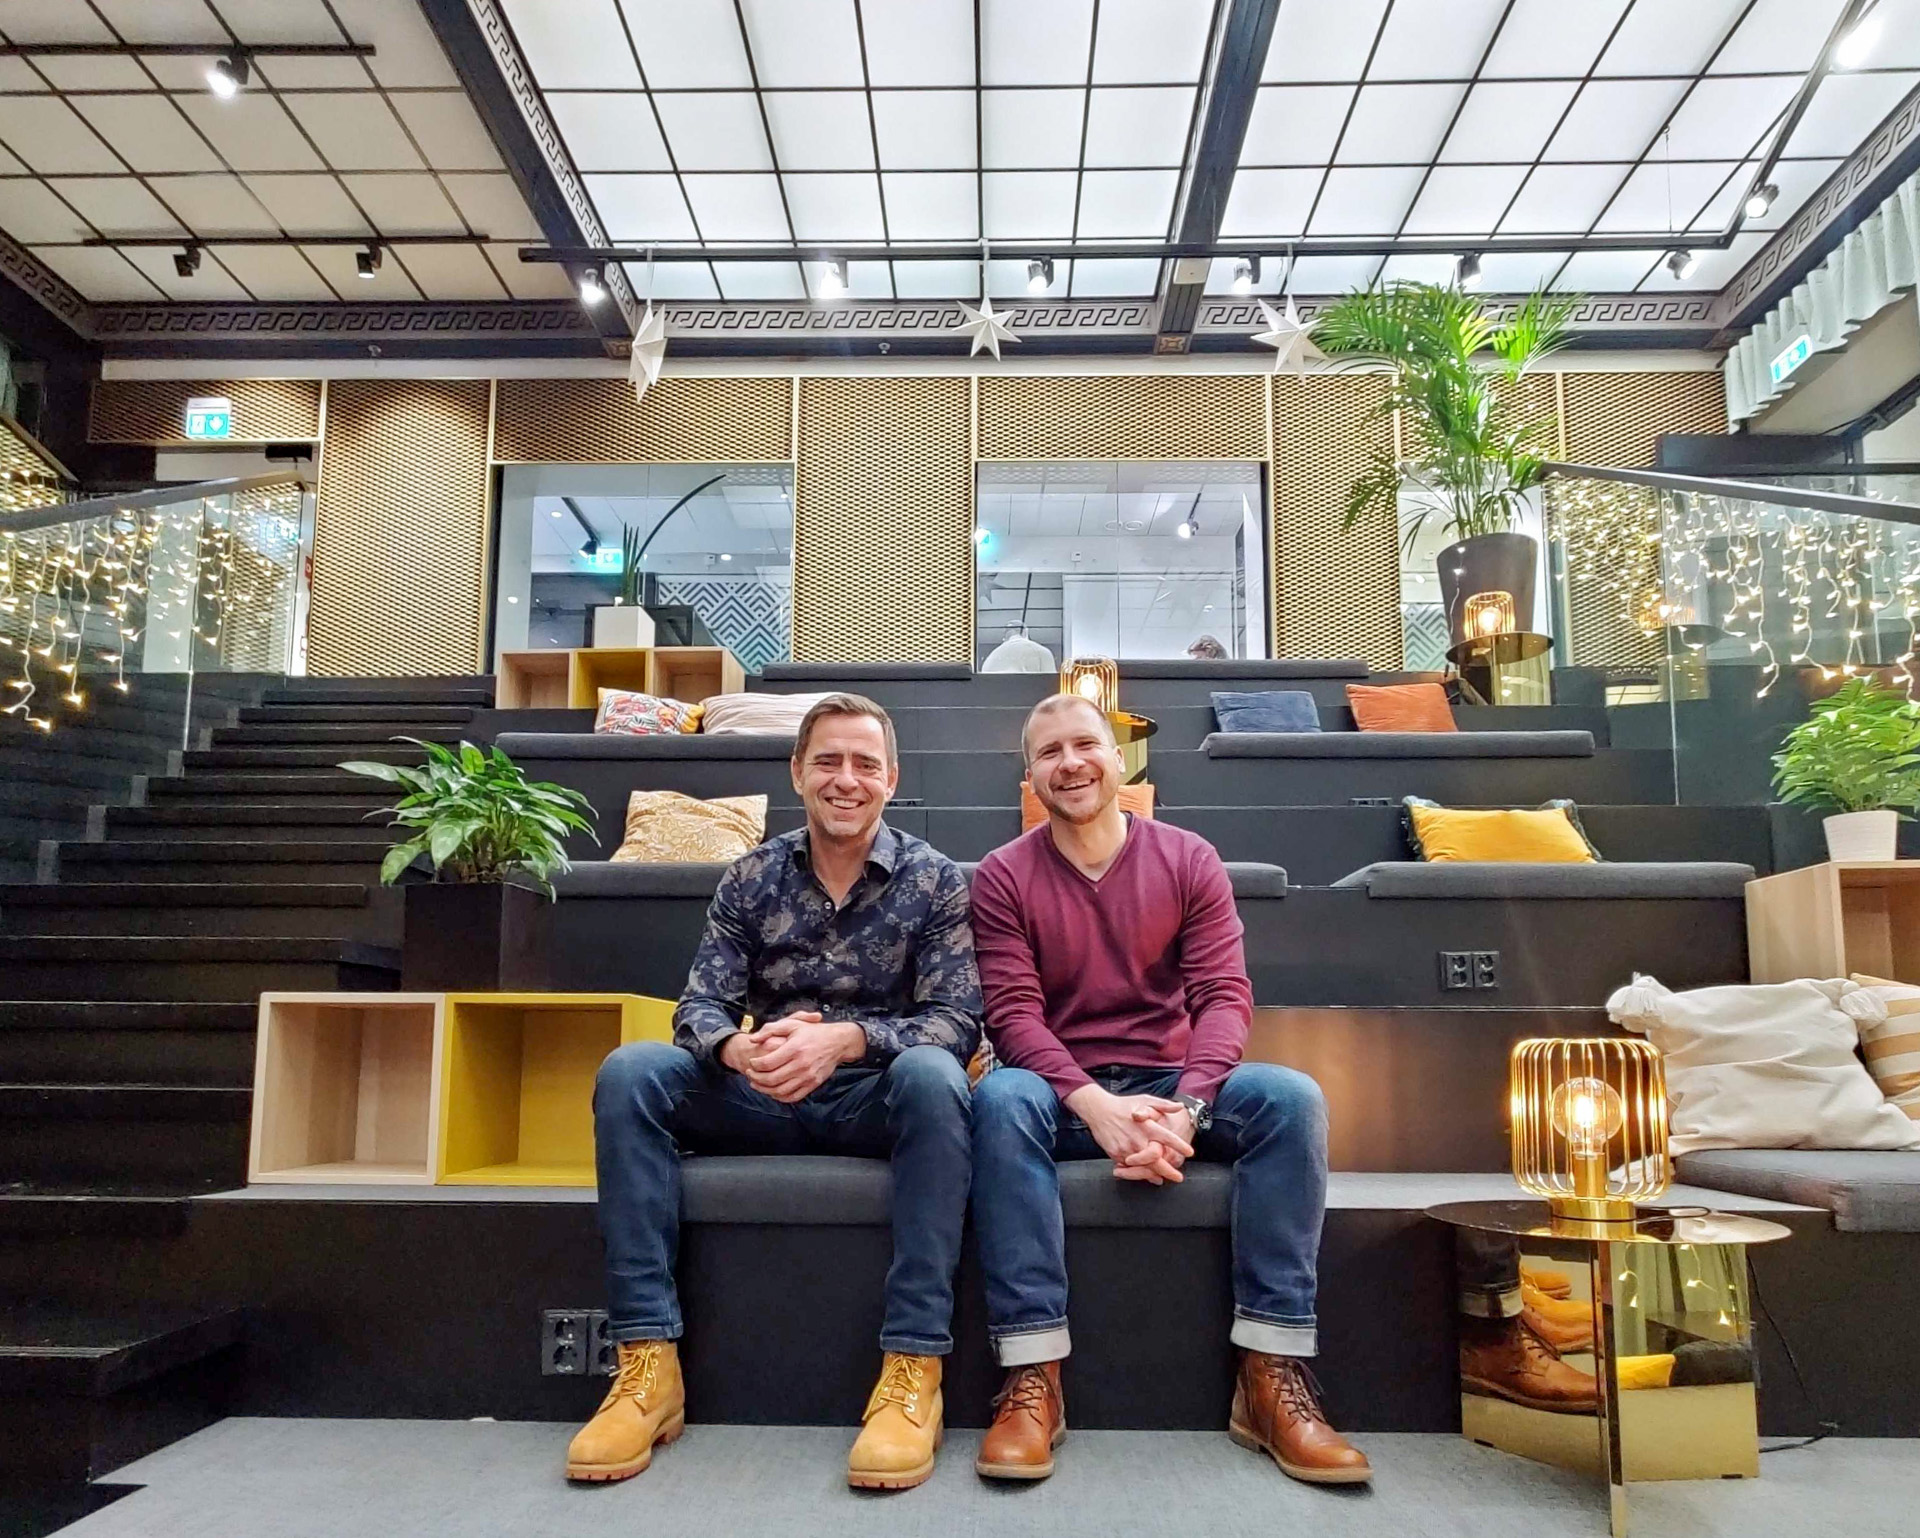 Epicenter Helsinki's Country manager Kristian Nieminen and Spouse Program's project coordinator Jochen Faugel sitting on the stairs of Epicenter Helsinki's lounge.